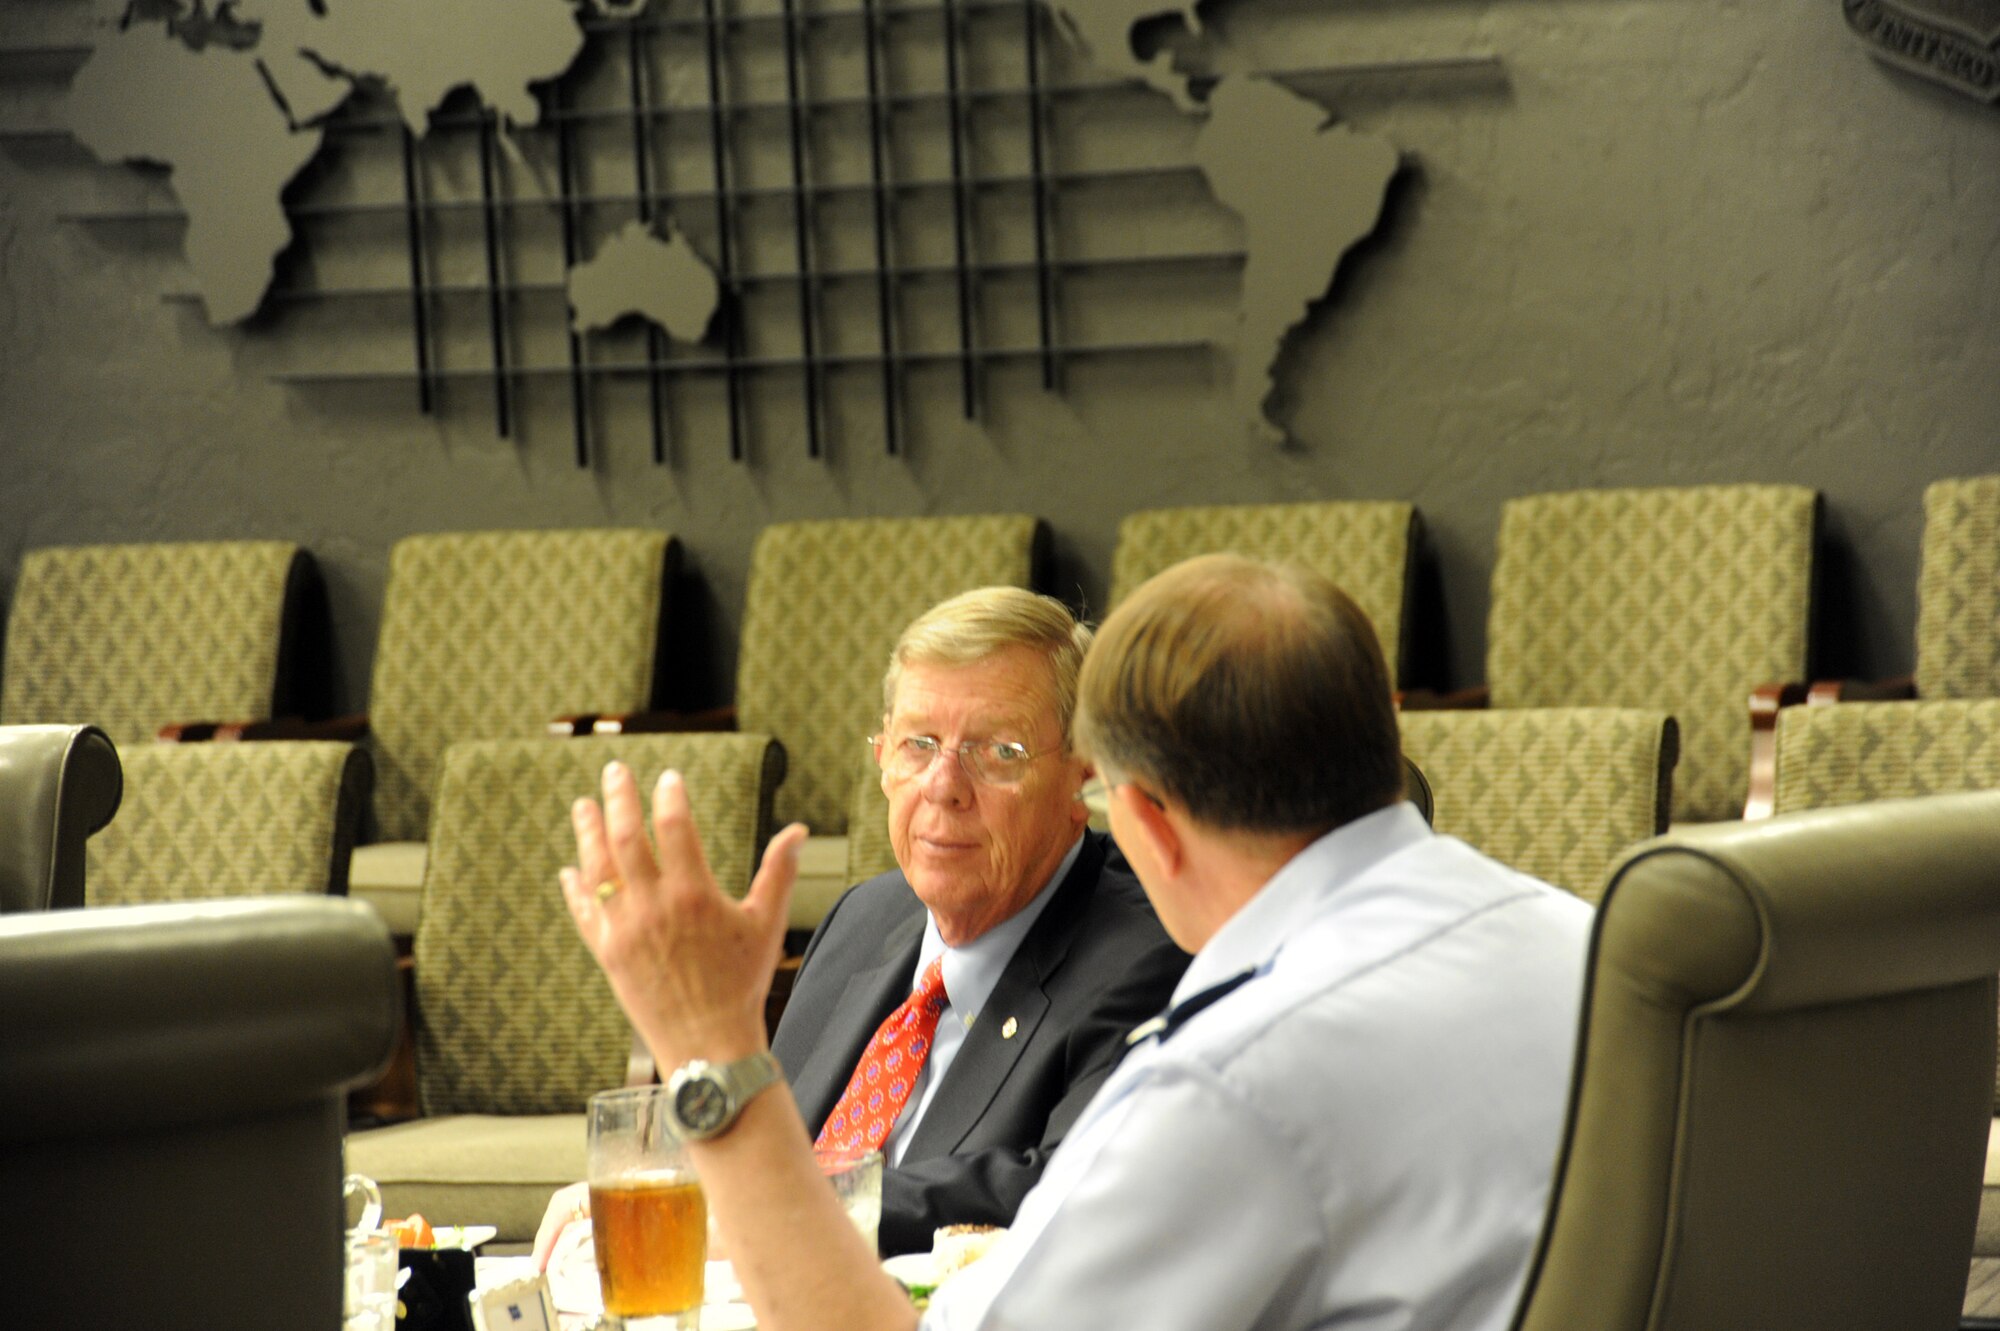 Lt. Gen. Charles E. Stenner Jr. talks with Sen. Johnny Isakson (R-GA) during the senator's visit to Headquarters AFRC May 14, 2011. The AFRC commander shared his vision of "Total Force 21," a recommendation to right-size the command to meet growing requirements and shrinking budgets. (U.S. Air Force photo/Raymond Crayton Jr.)